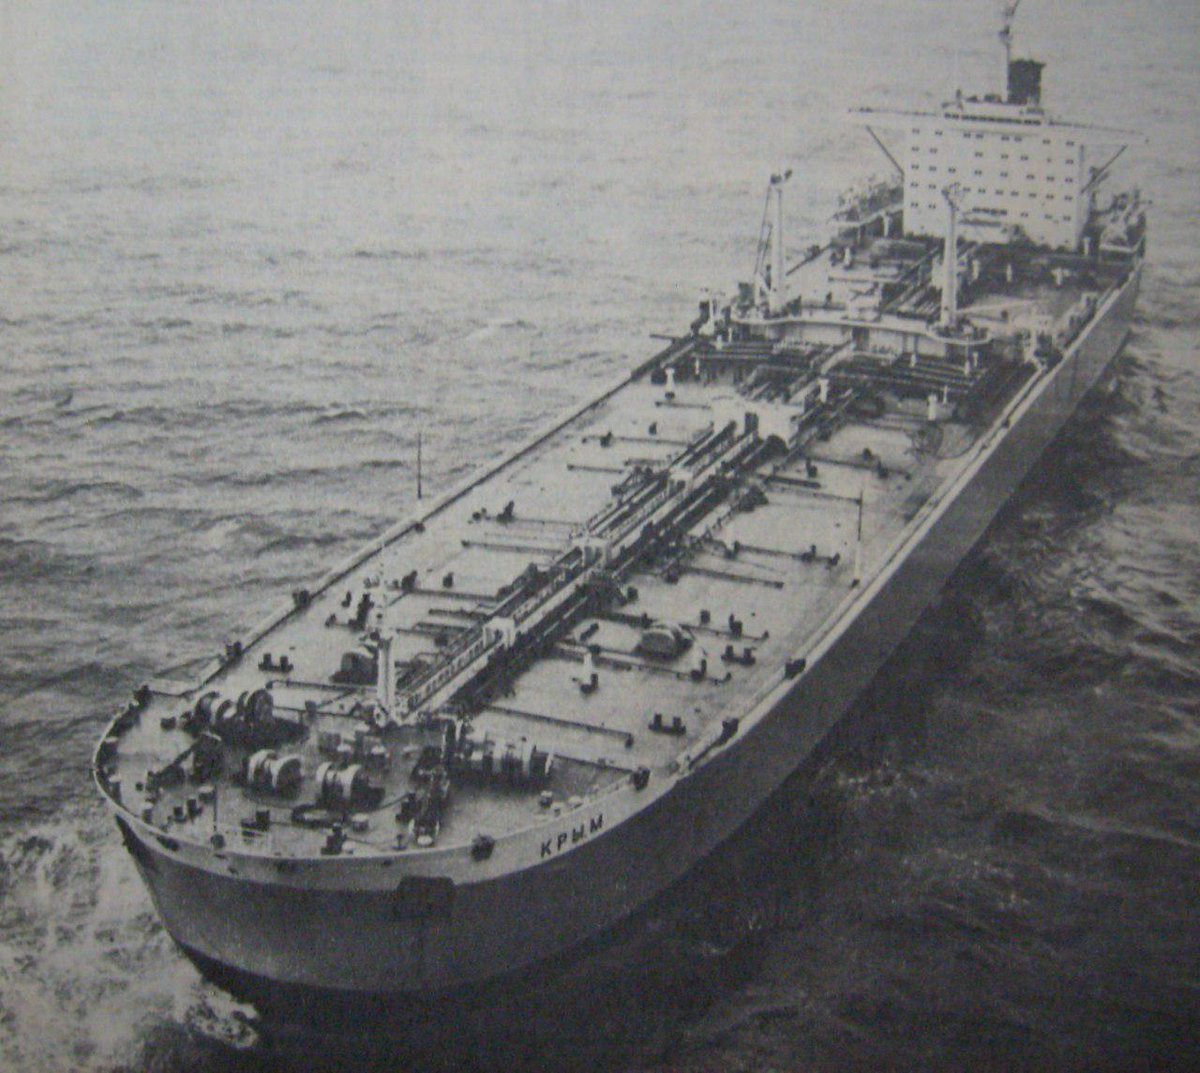 🛳 #OTD in 1974, the first Soviet supertanker #Crimea was launched. She was a true masterpiece of engineering: with a size equal to 3 football fields in length & 8 storey building in height, Crimea managed to easily navigate narrow straits while carrying 150k tonne cargoes!